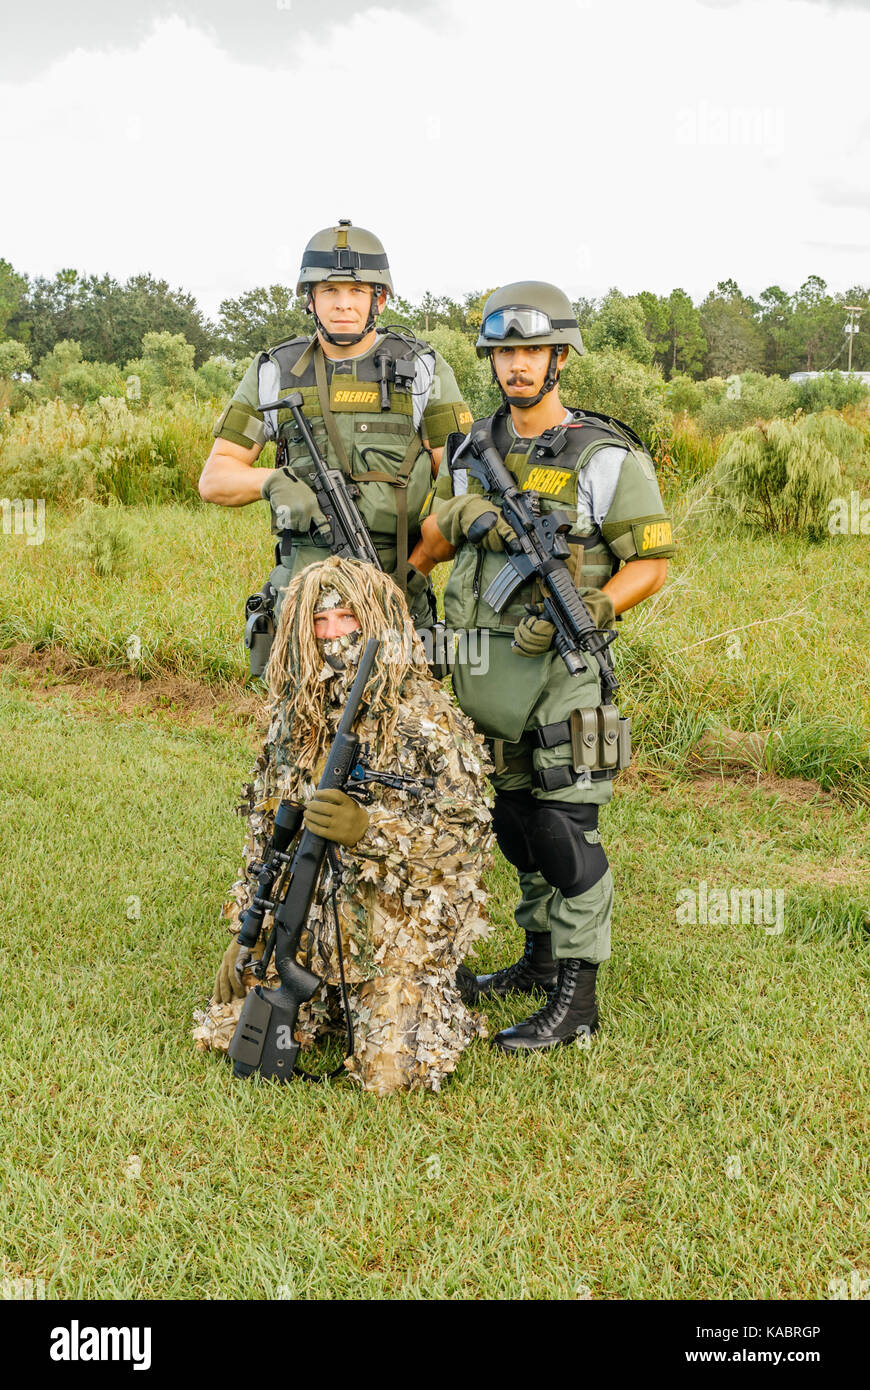 Three members of the Hillsborough County Sheriff's Office SWAT team, with full gear and one in a ghillie suit ready for a day of police training. Stock Photo